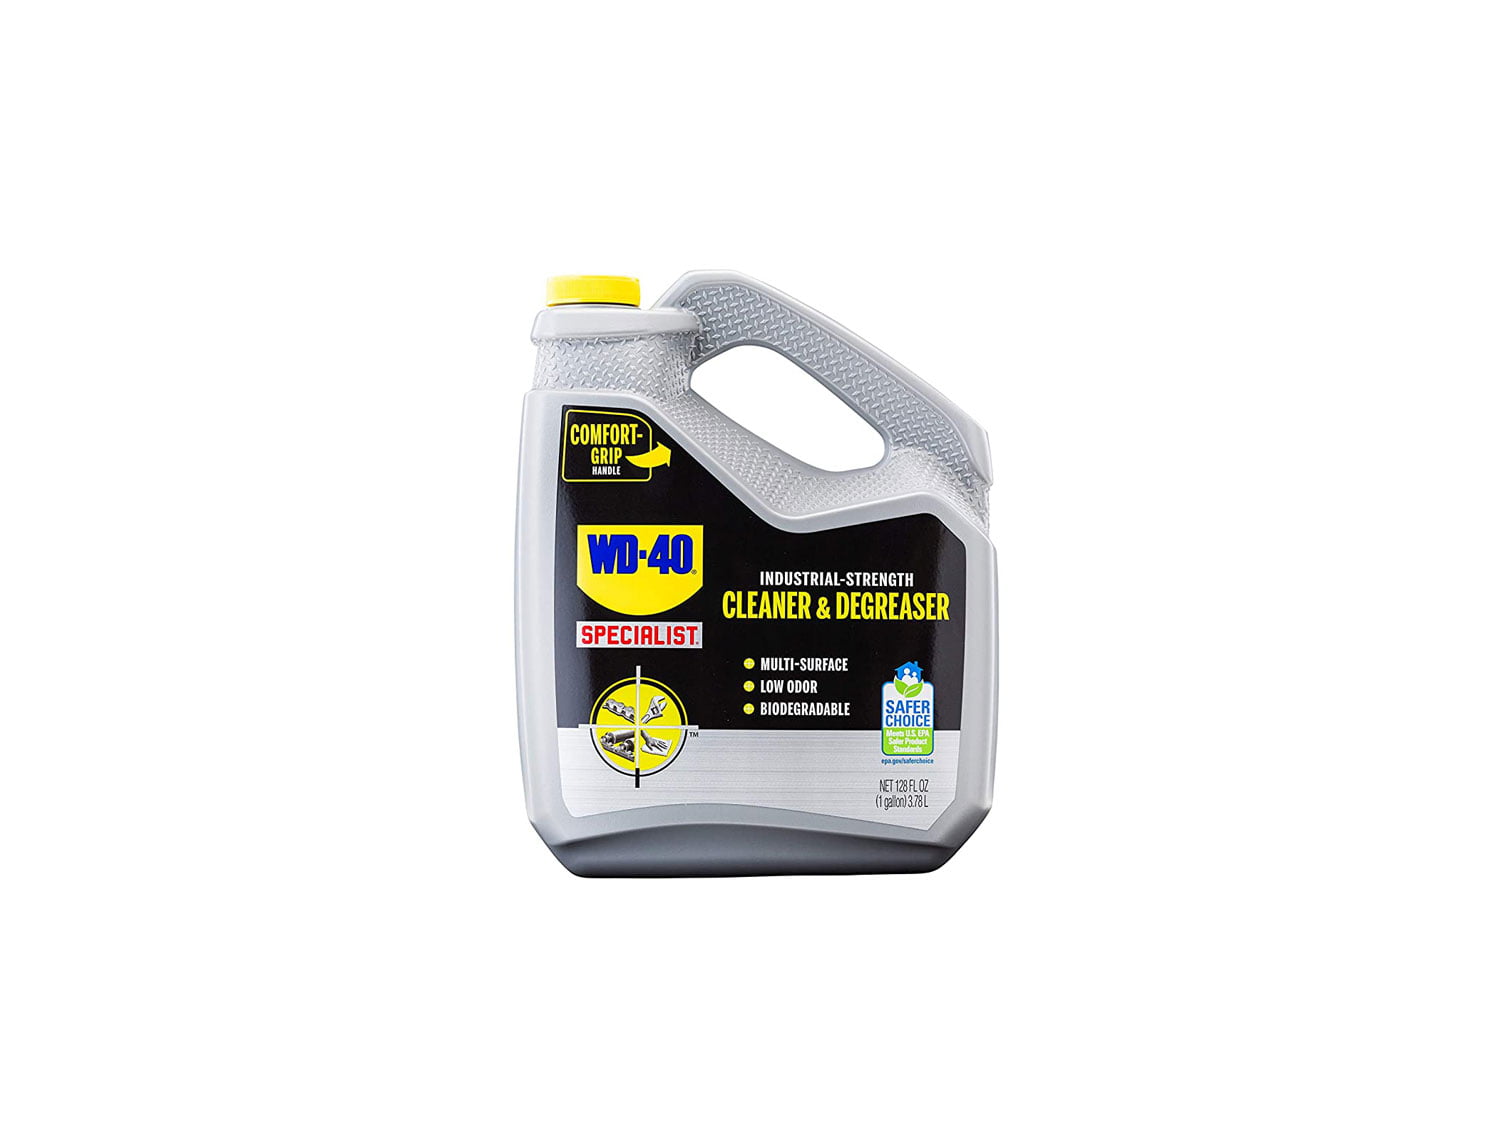 WD-40 300363 1-Pack Specialist Industrial-Strength Cleaner & Degreaser, 1 Gallon